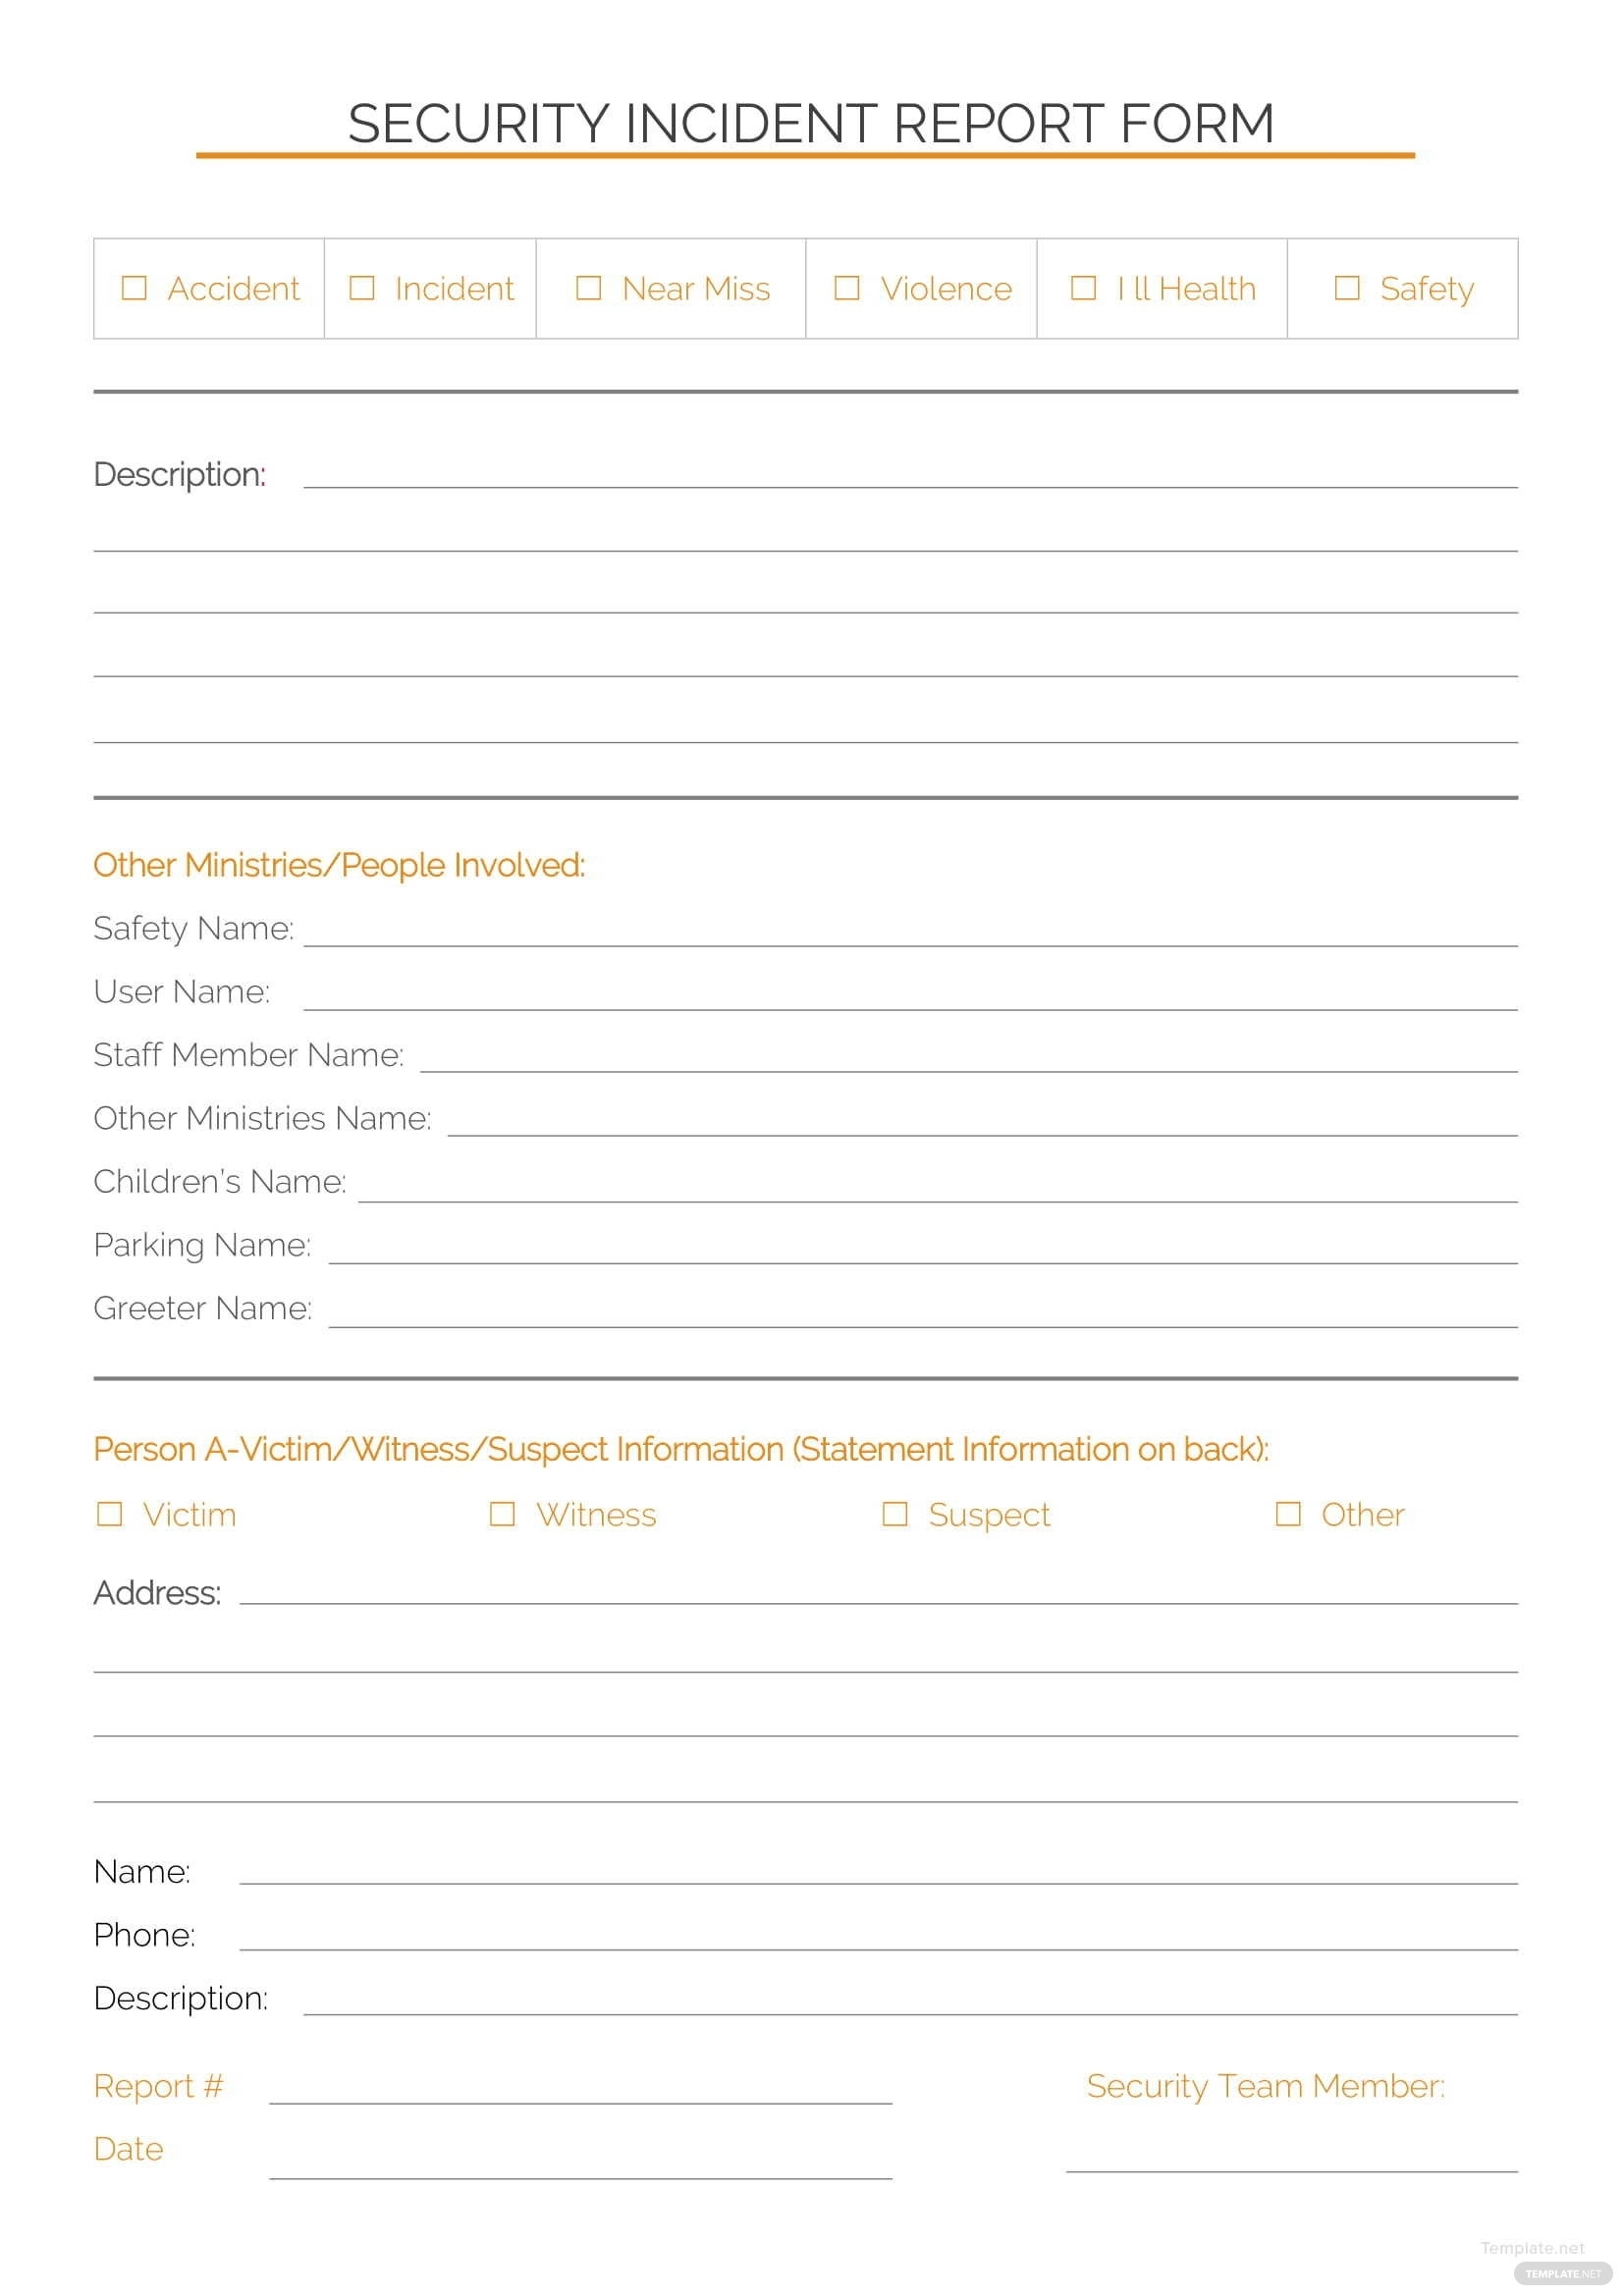 Security Incident Report Template In Microsoft Word, Pdf | Template Within Incident Report Form Template Word